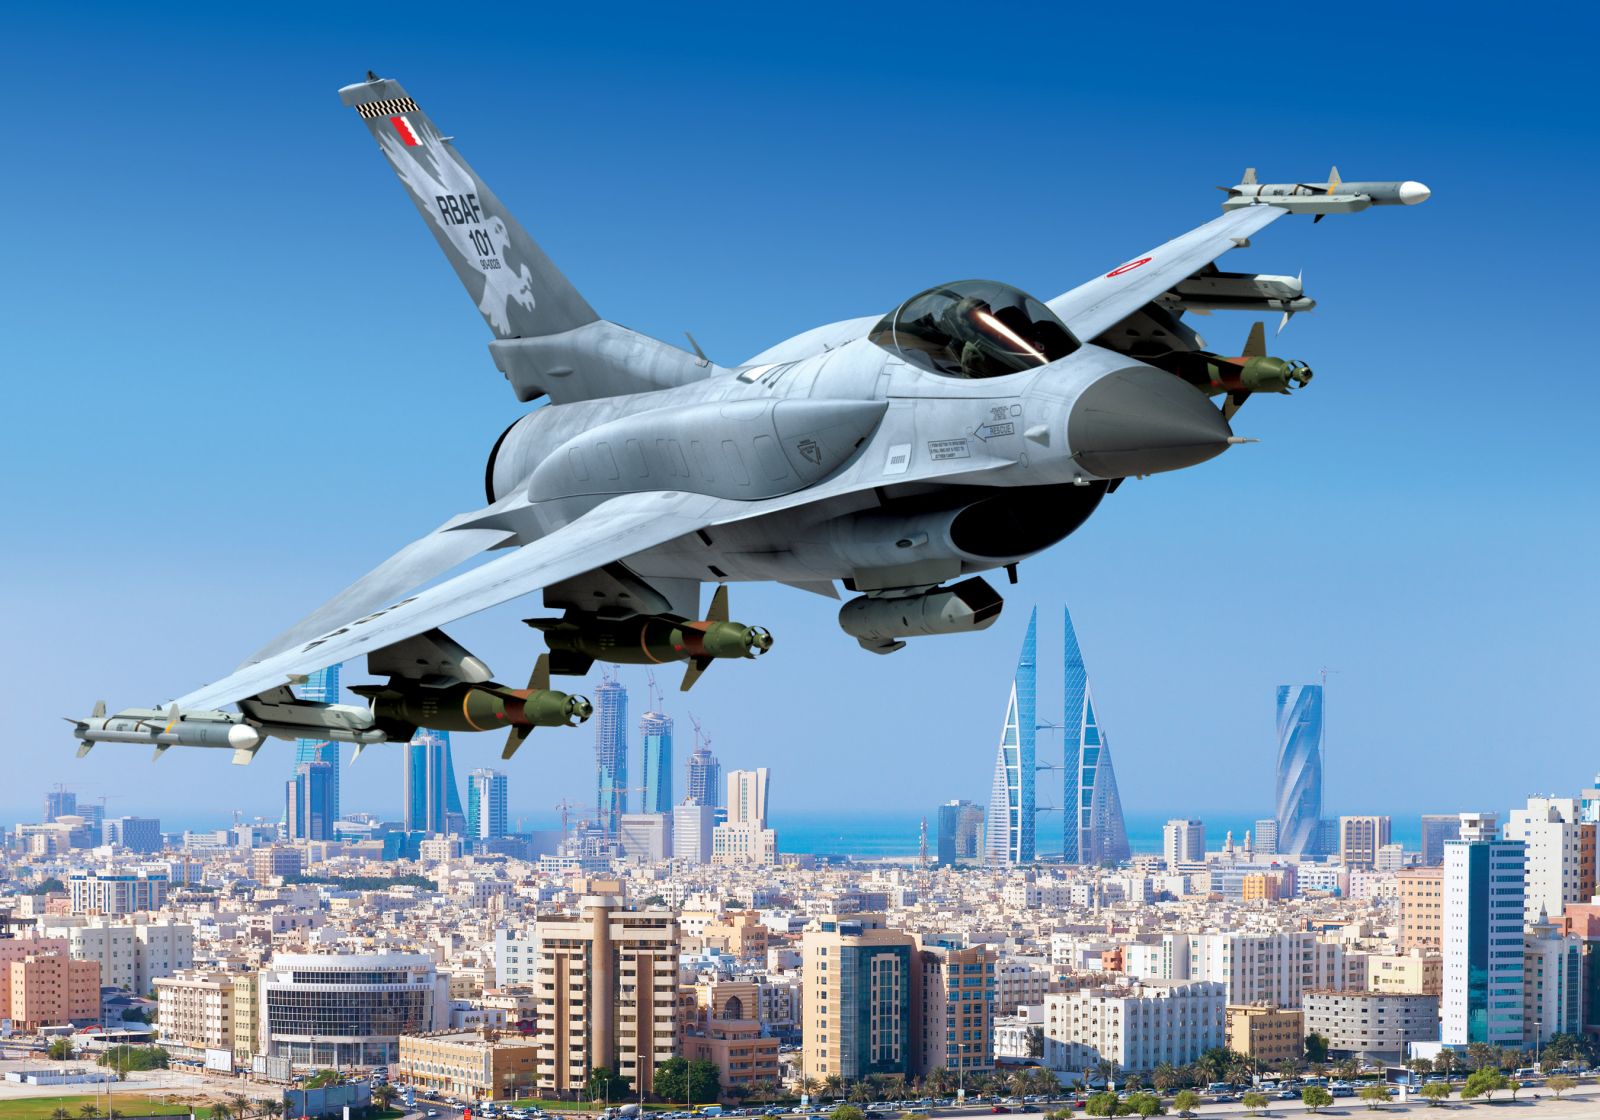 This rendering of an F-16 Fighting Falcon flying over Manama, Bahrain, was posted when Lockheed was awarded a $1.12 billion contract from the U.S. government to build 16 new Bahraini aircraft. (Photo/Provided)